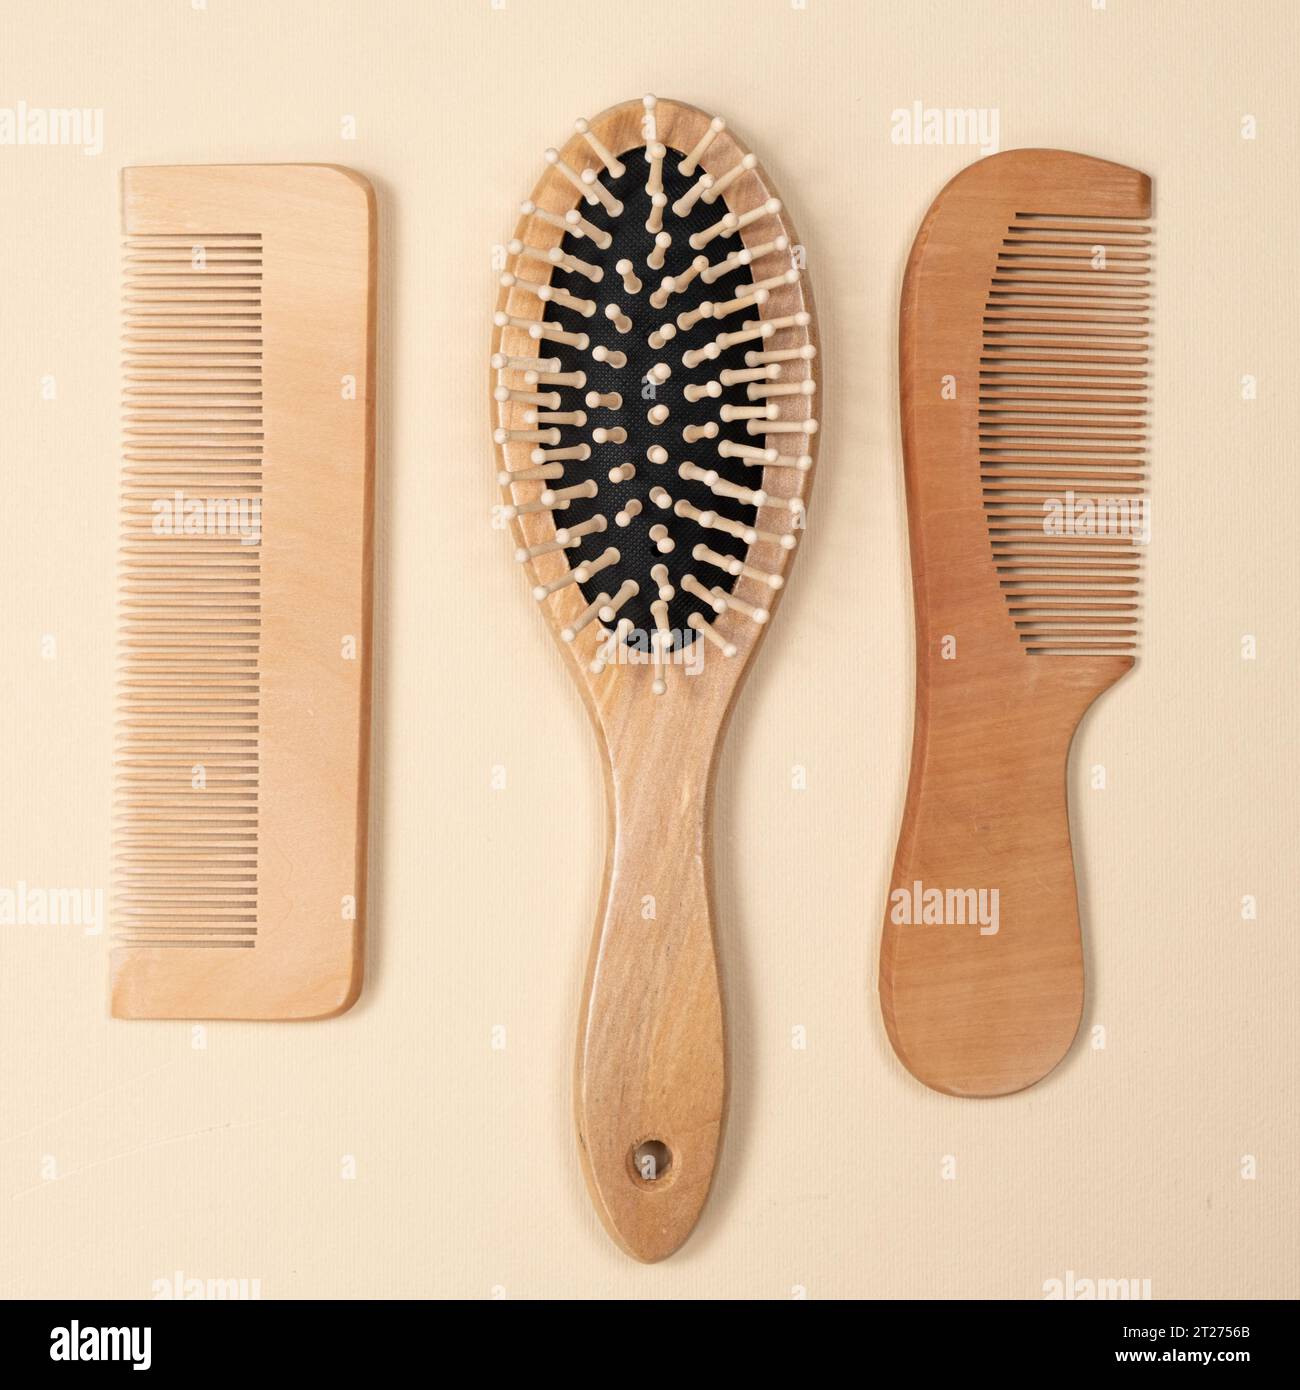 Wooden combs and hair care brush on beige background, top view Stock Photo